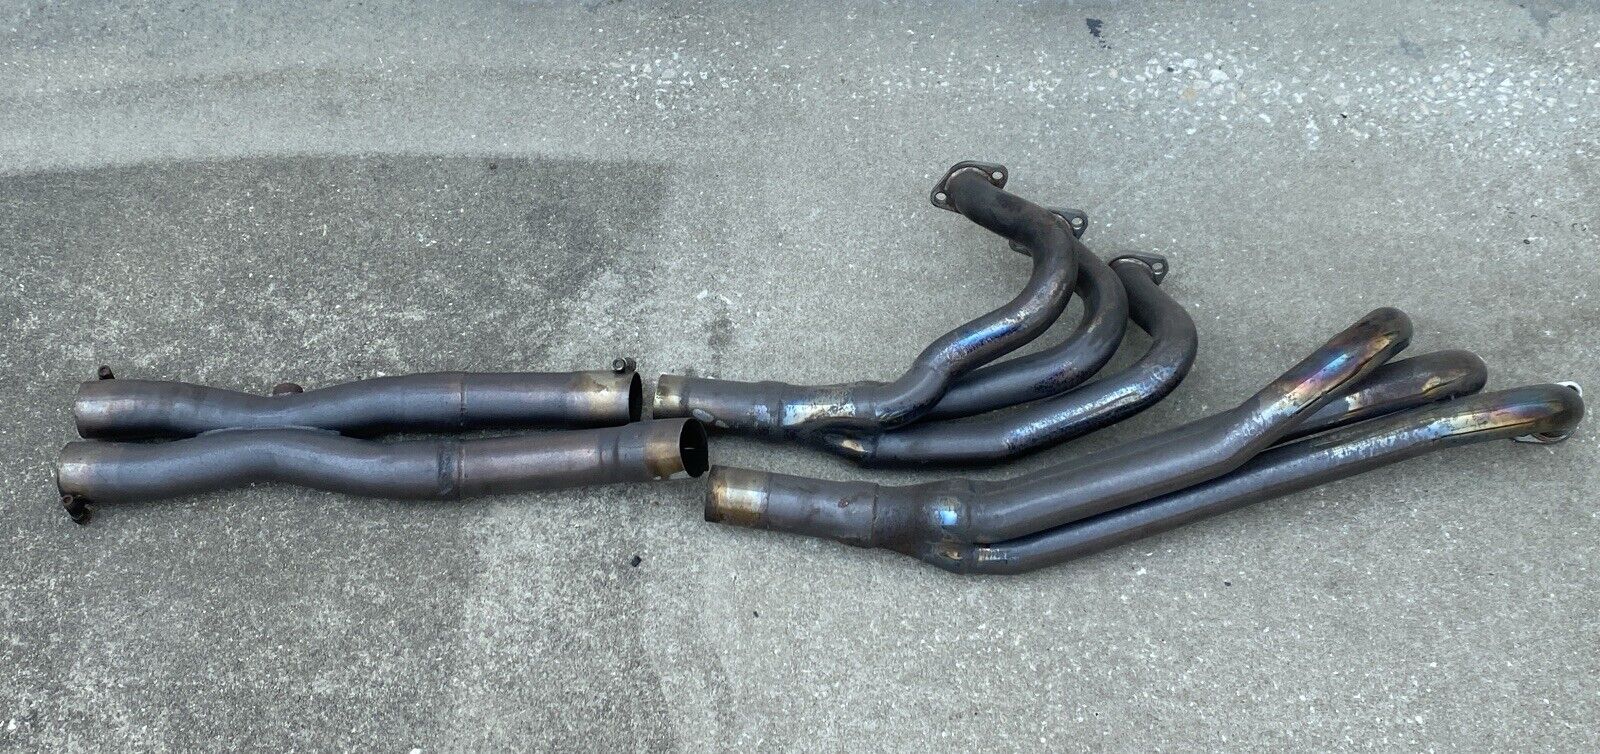 BMW e30 325i 325is Stainless Exhaust Headers w/ Cross Pipe - USED